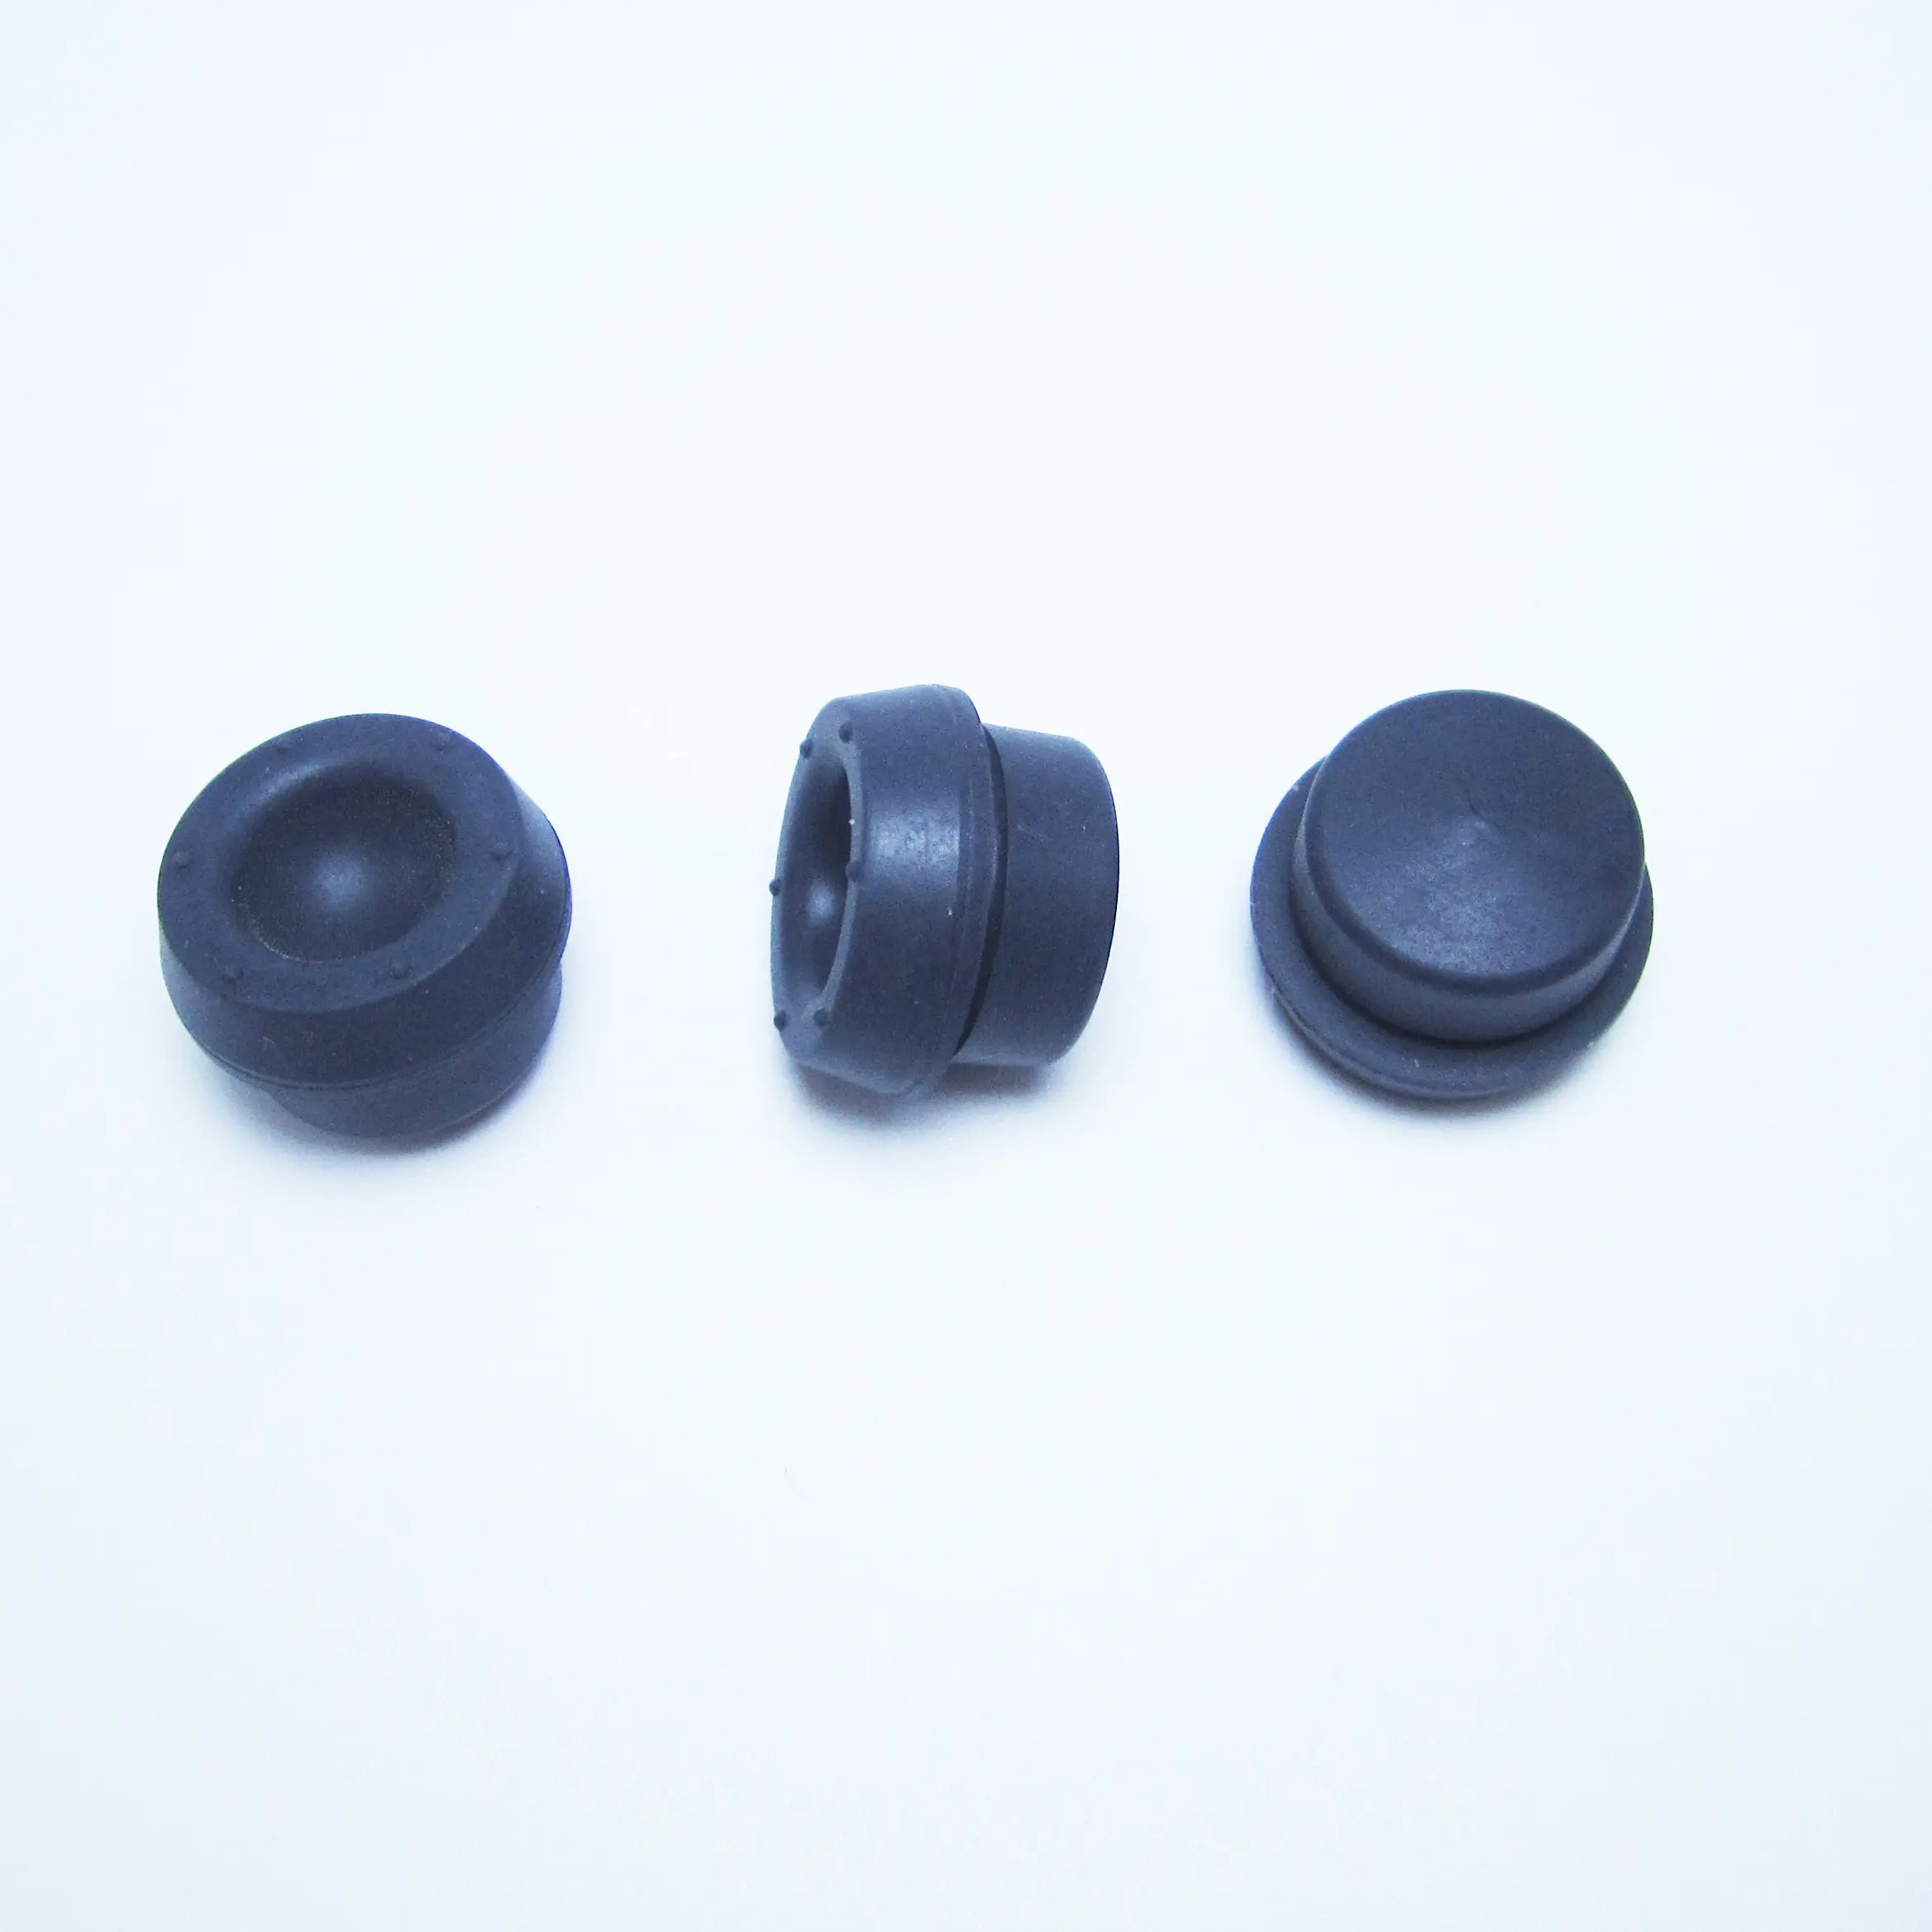 Medical use 16mm butyl rubber stoppers for vacuum blood collection tube